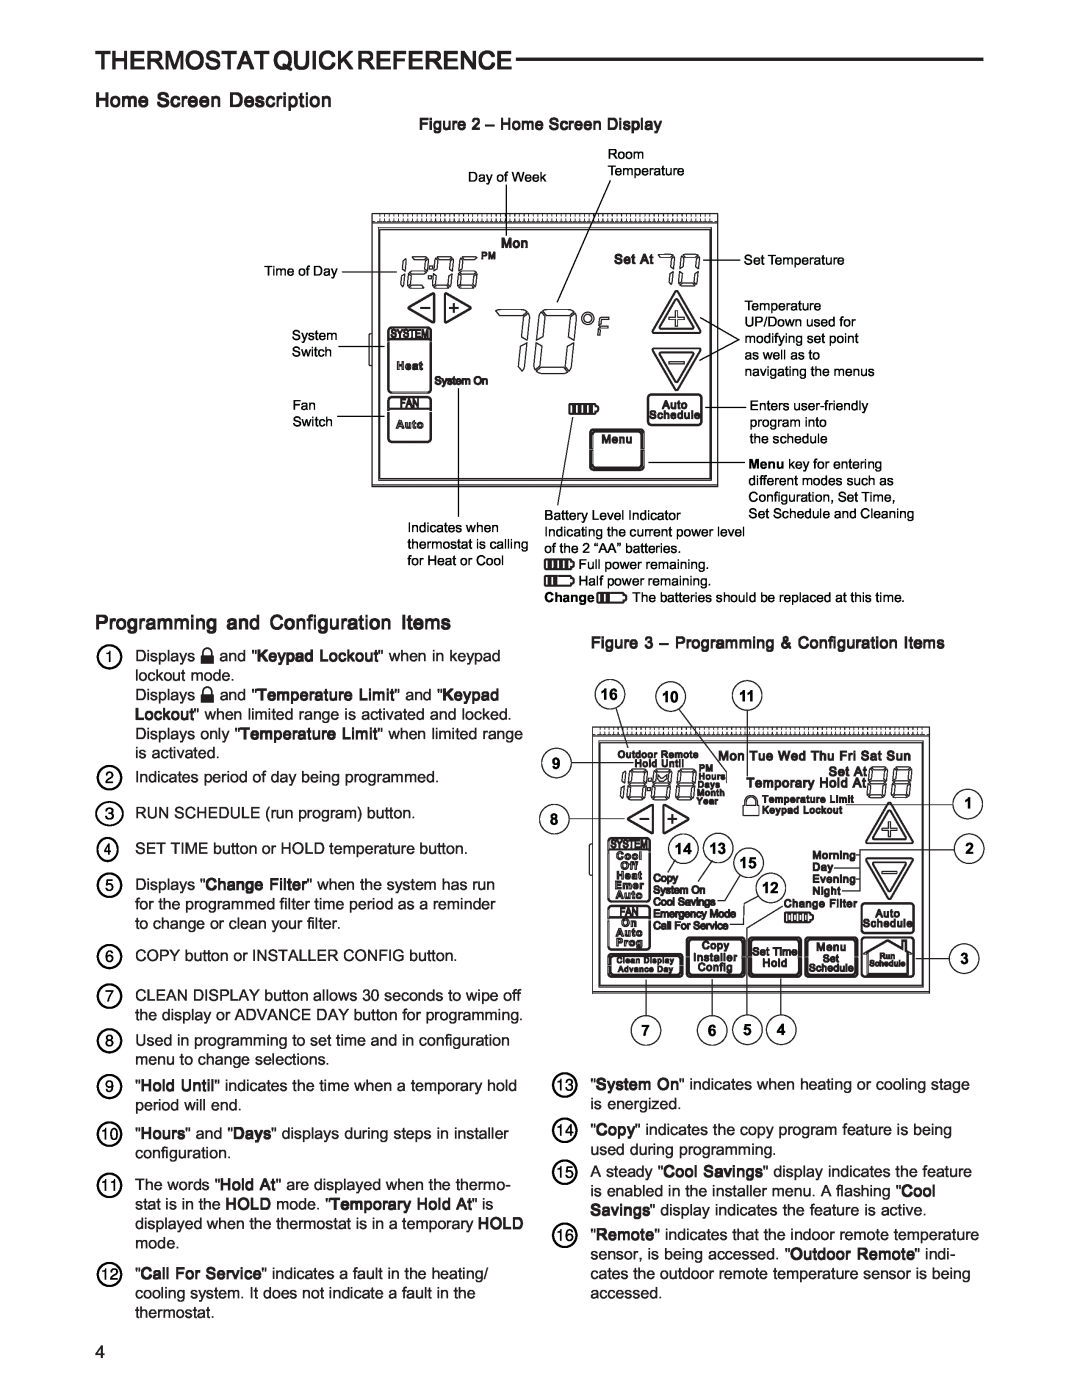 White Rodgers 1F97-1277 Thermostat Quick Reference, Home Screen Description, Programming and Configuration Items 